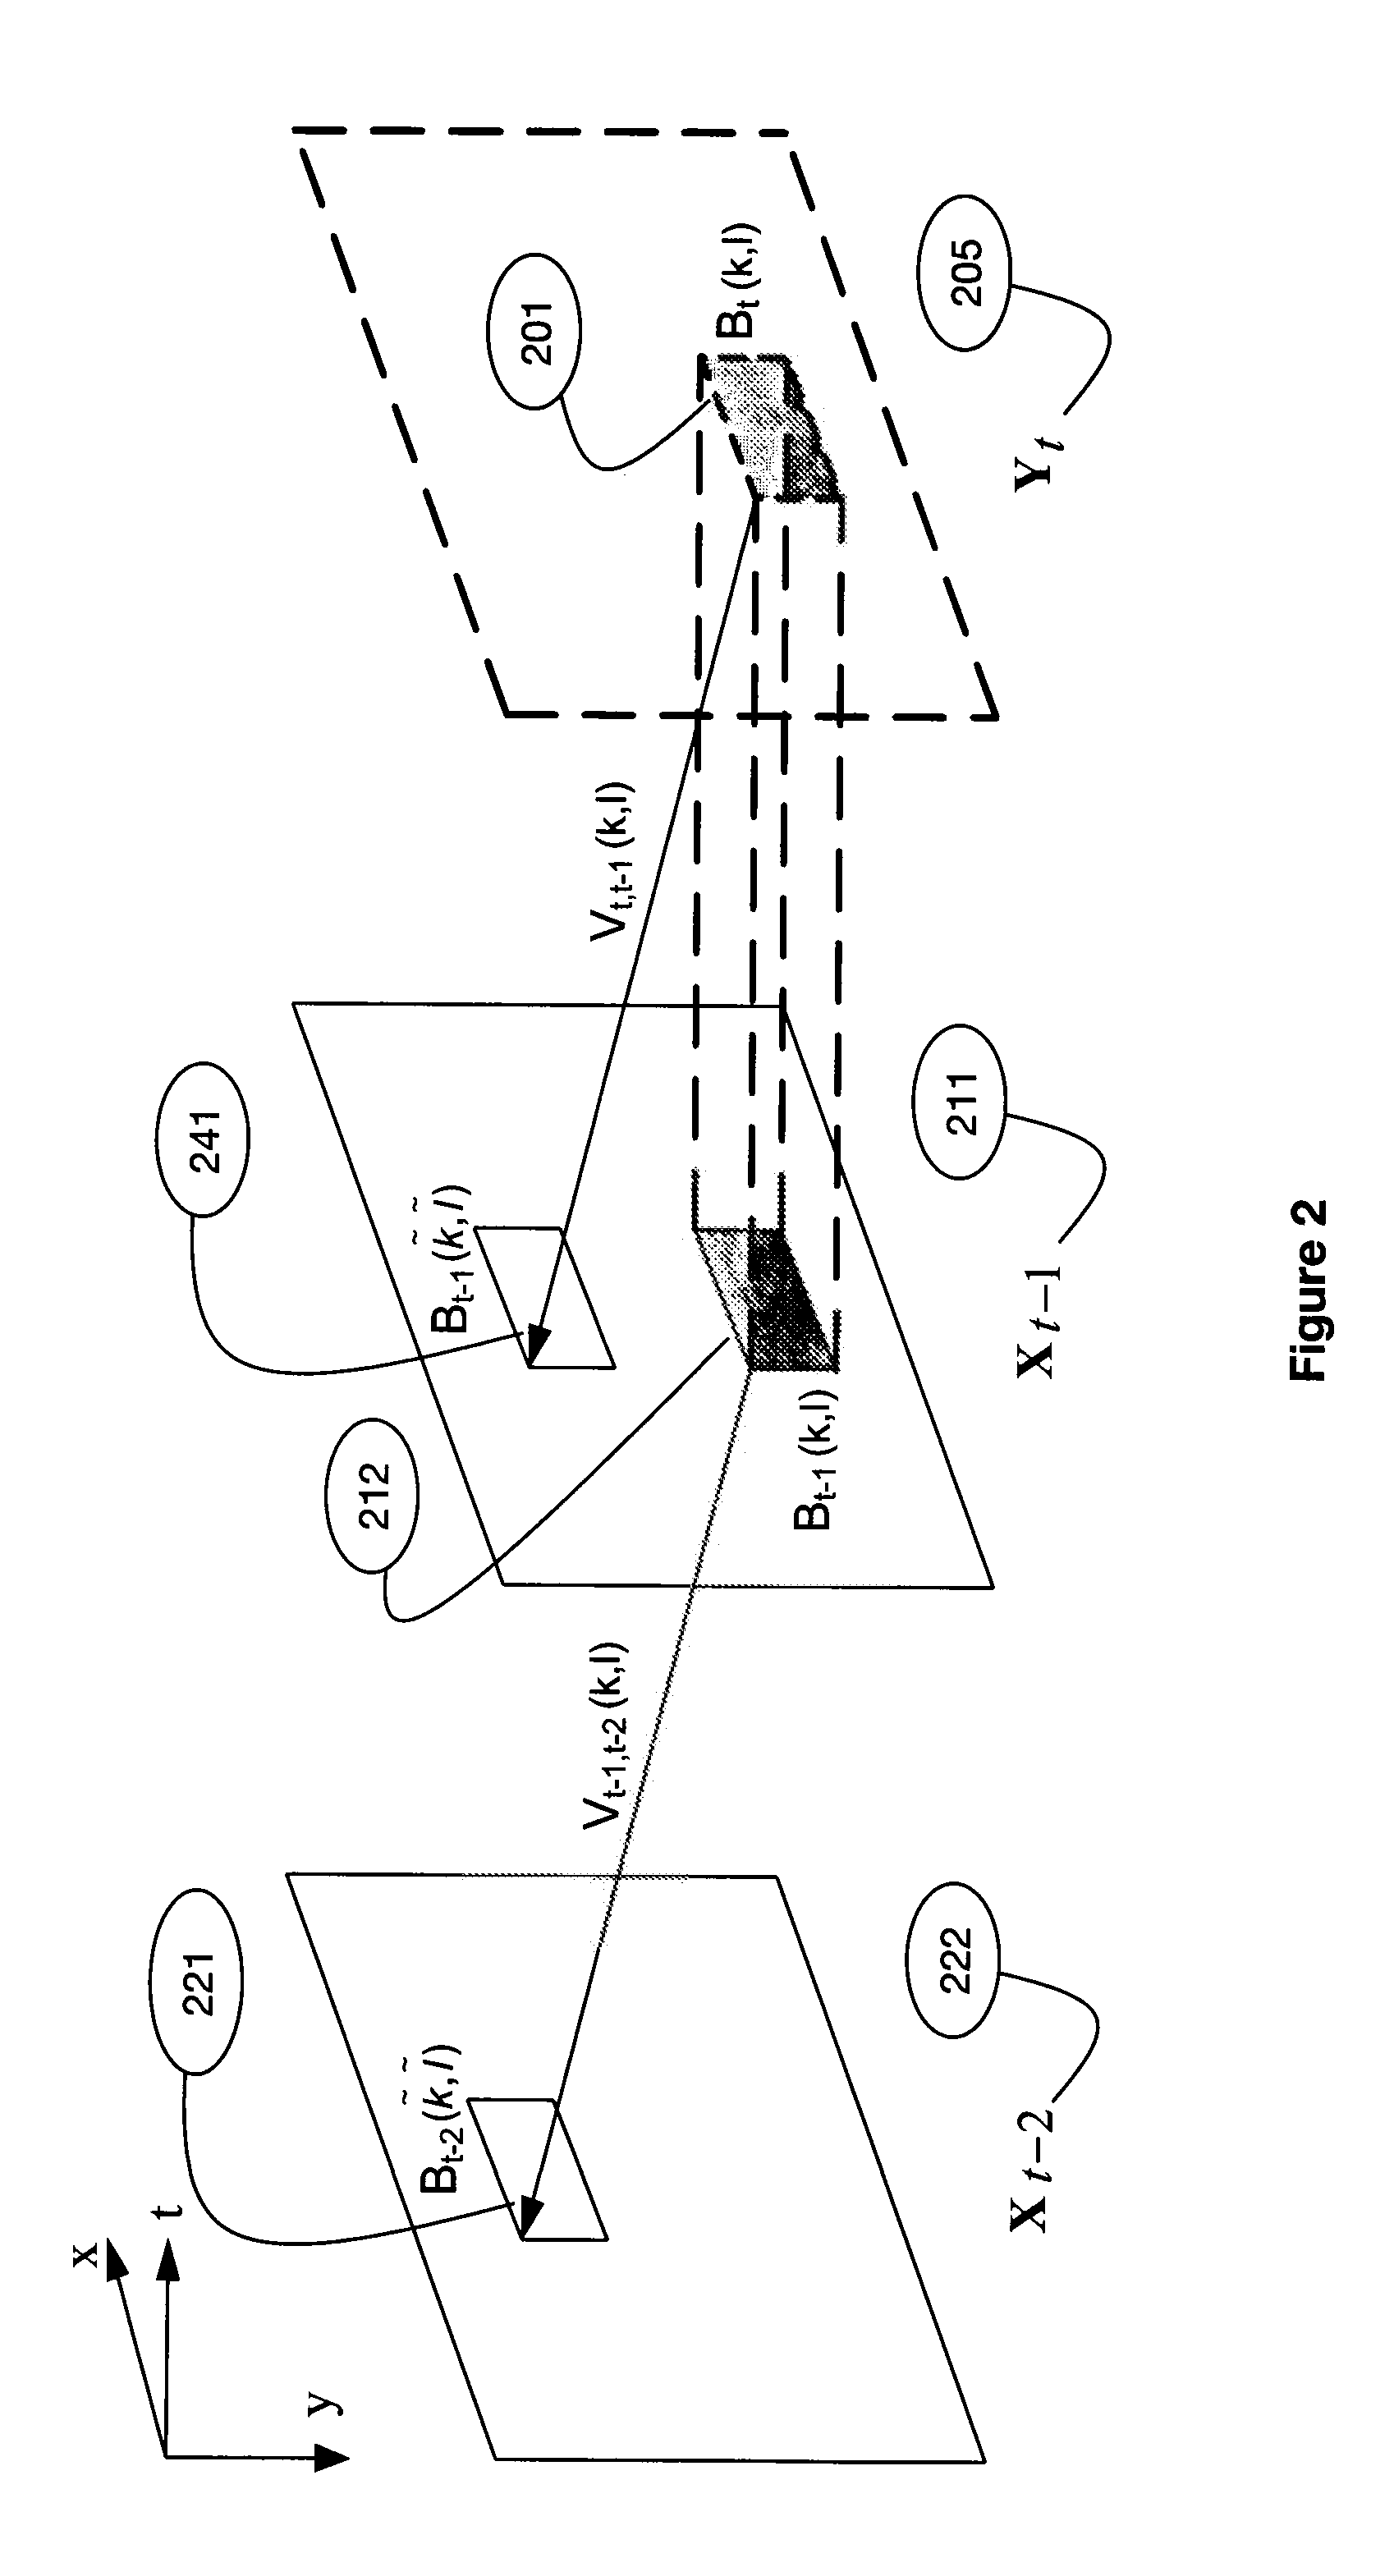 Image prediction method and system